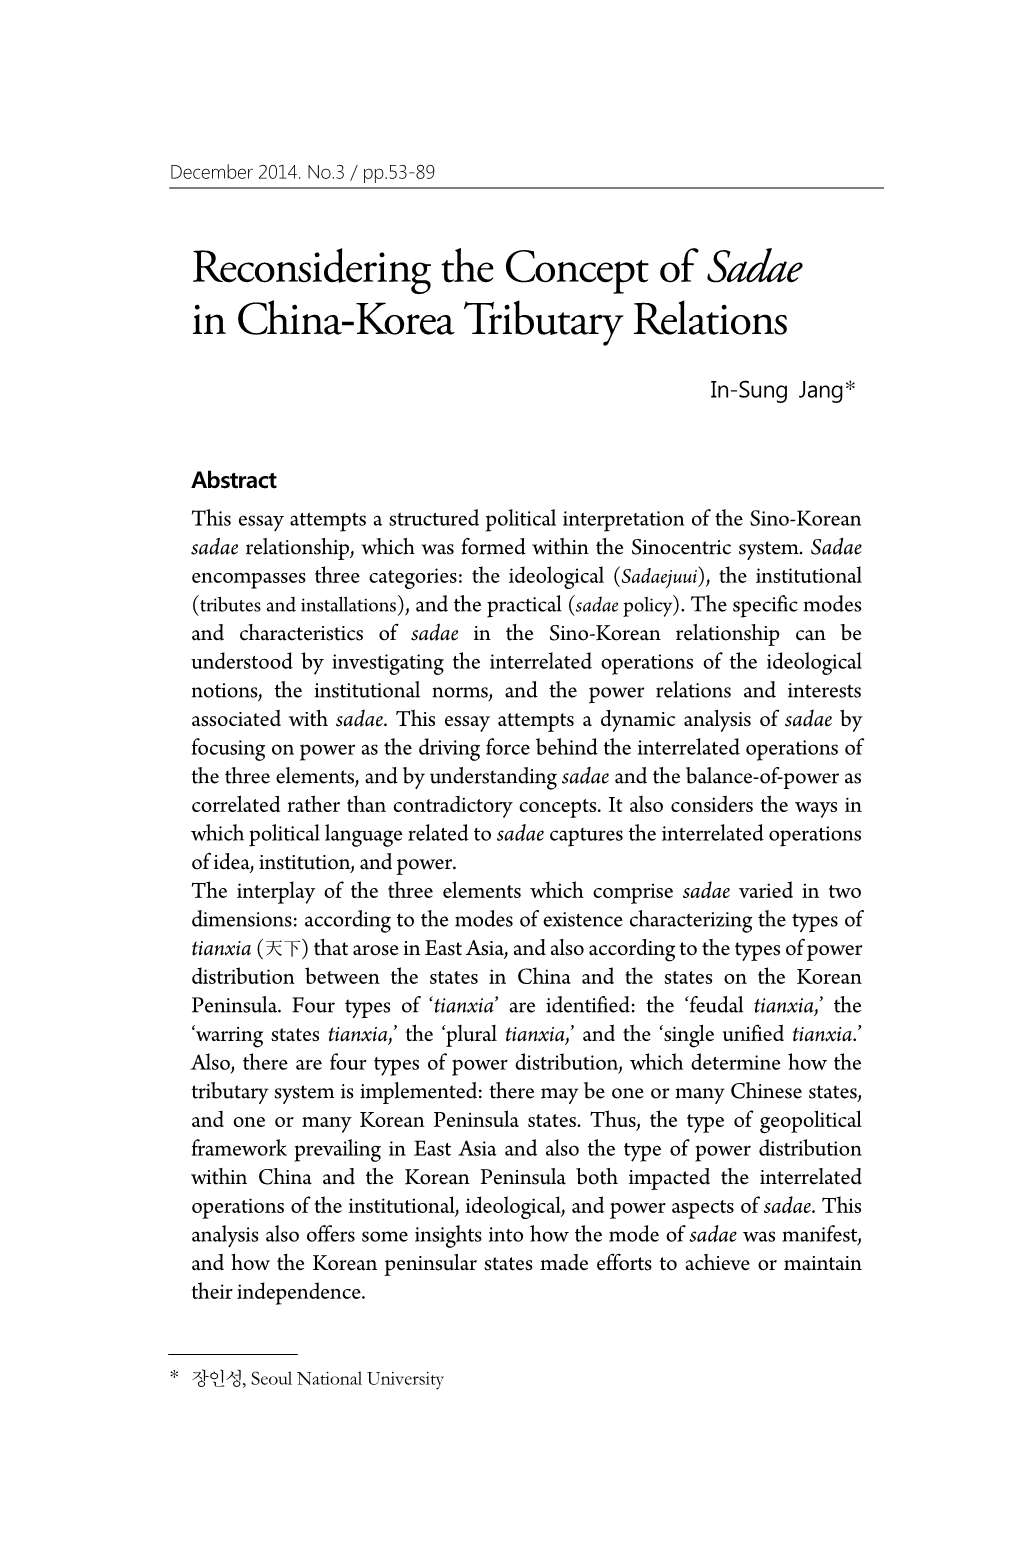 In-Sung JANG : Reconsidering the Concept of Sadae in China-Korea